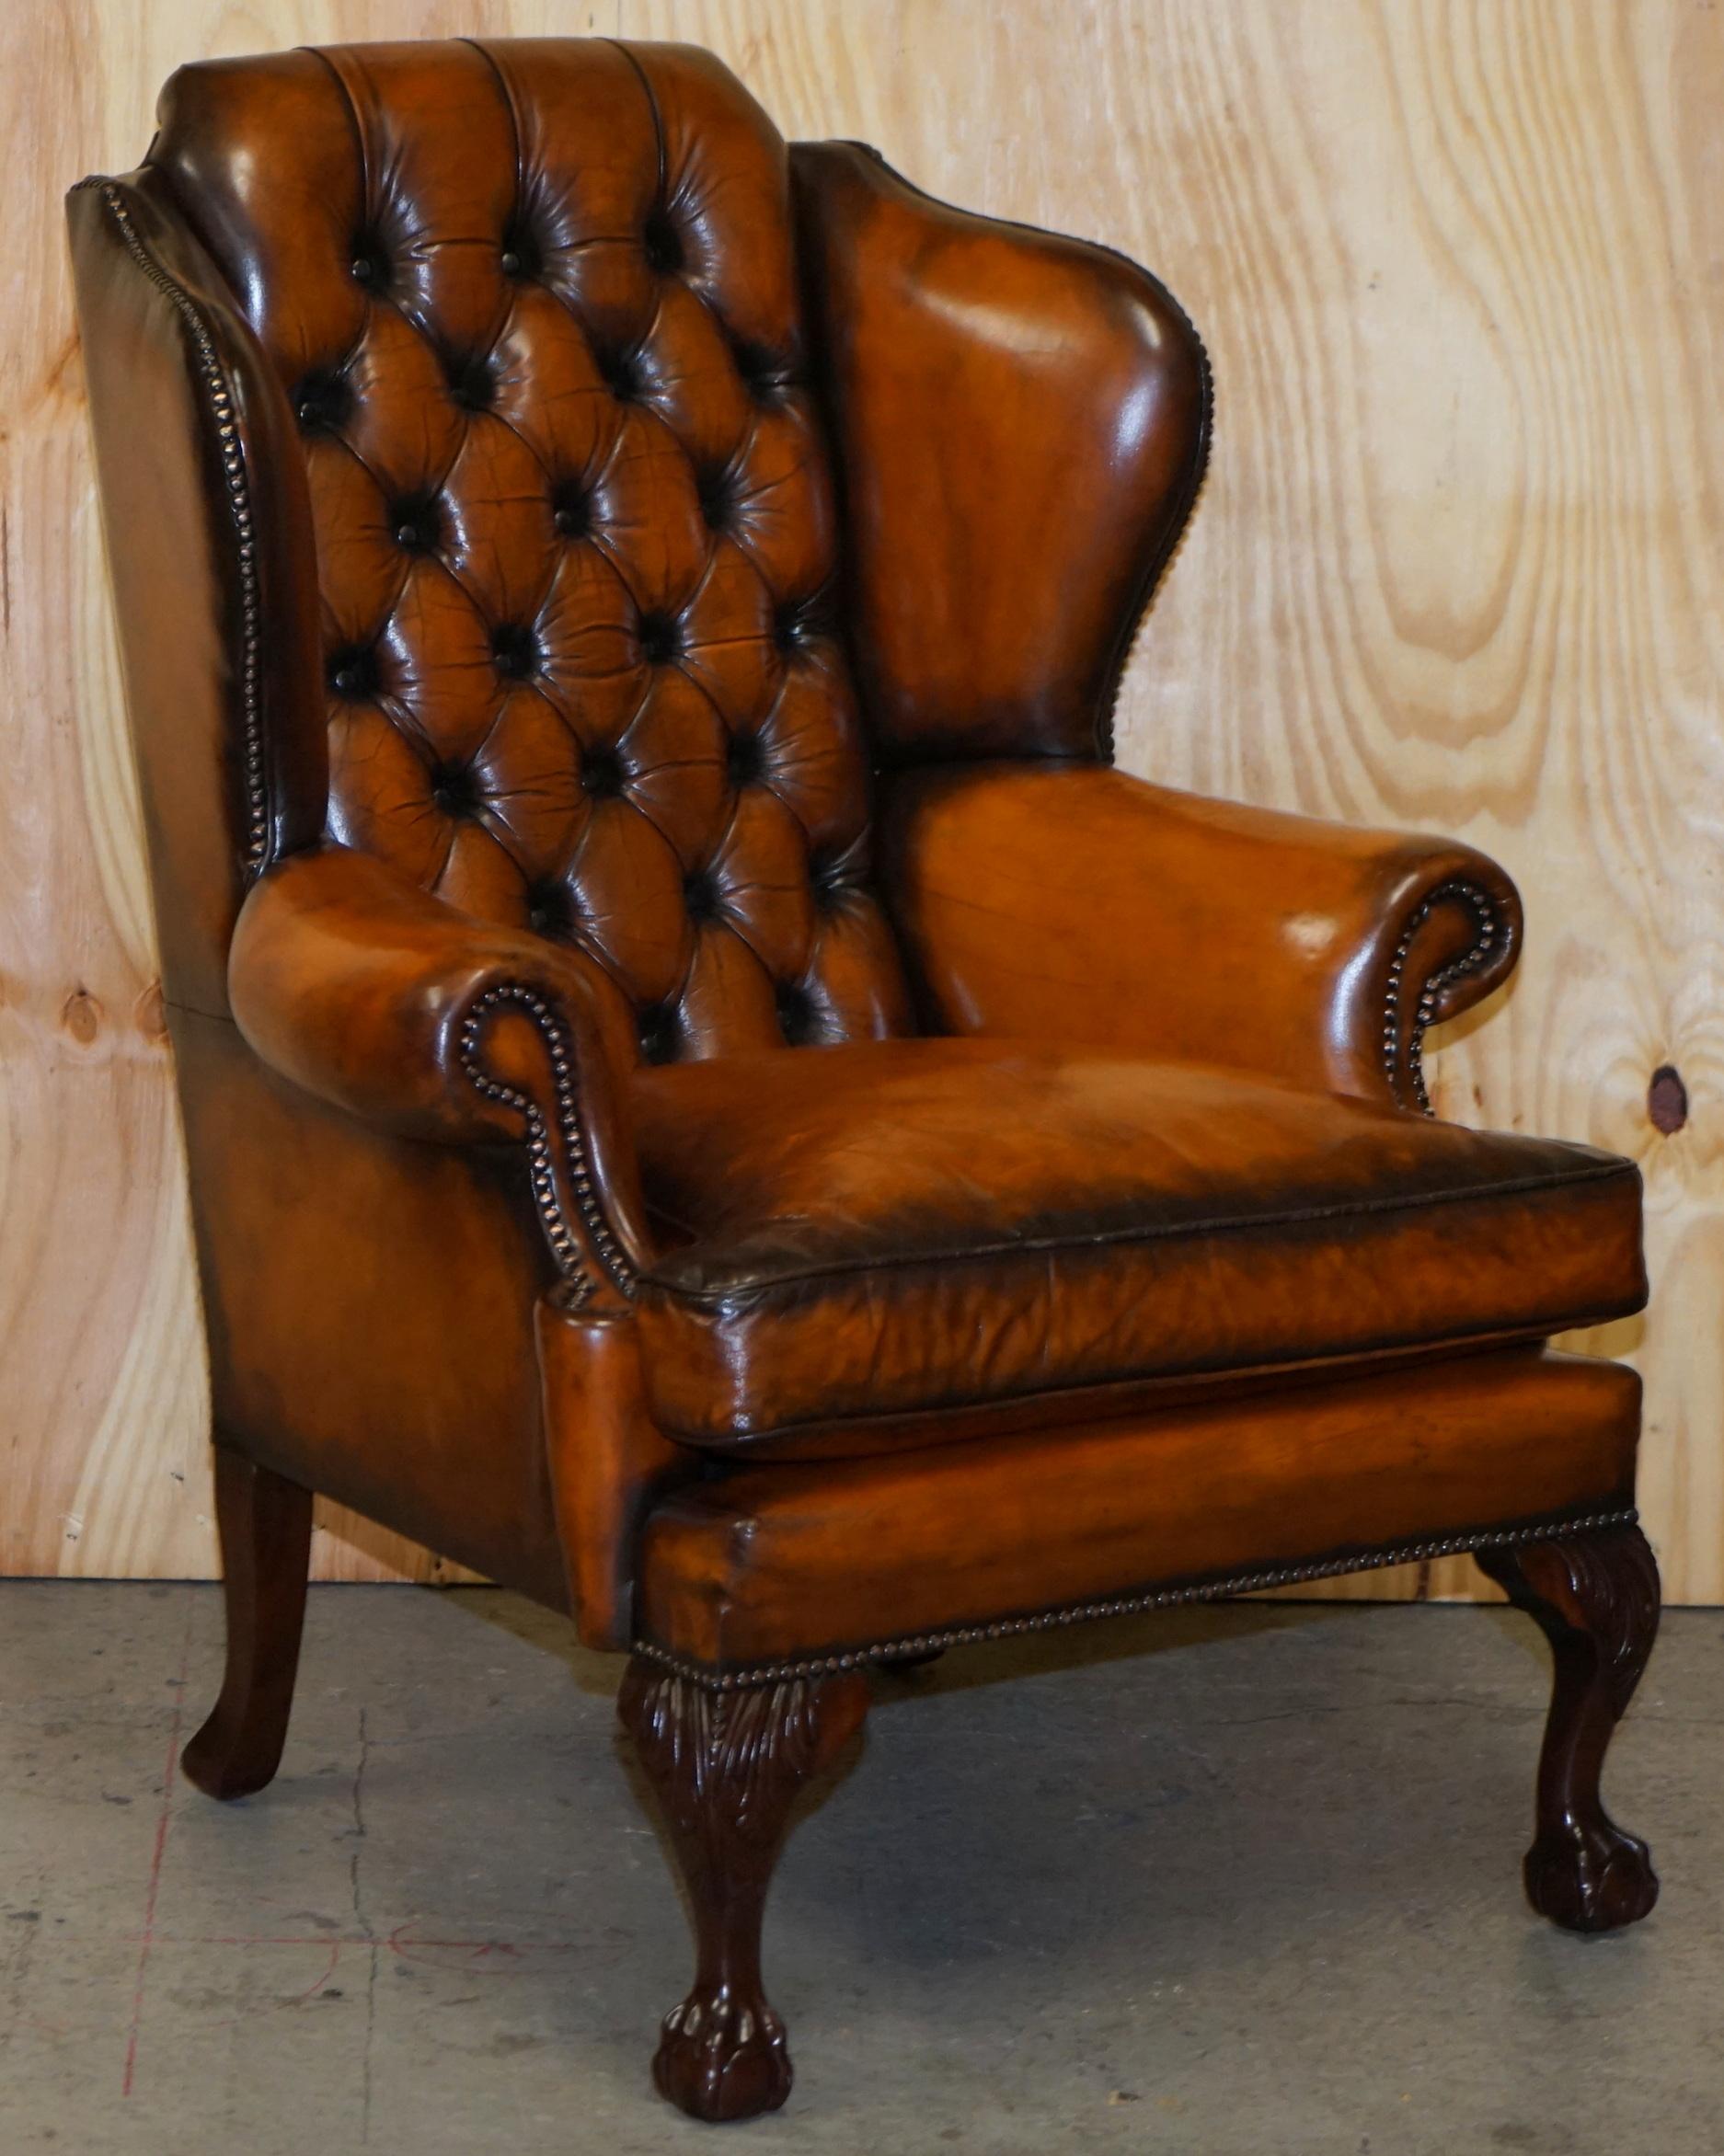 We are delighted to offer for sale this stunning pair of lovely Chesterfield Claw & Ball feet fully restored vintage wingback armchairs in Cigar brown leather with thick heavy feather filled cushions

A good looking and comfortable pair of coil